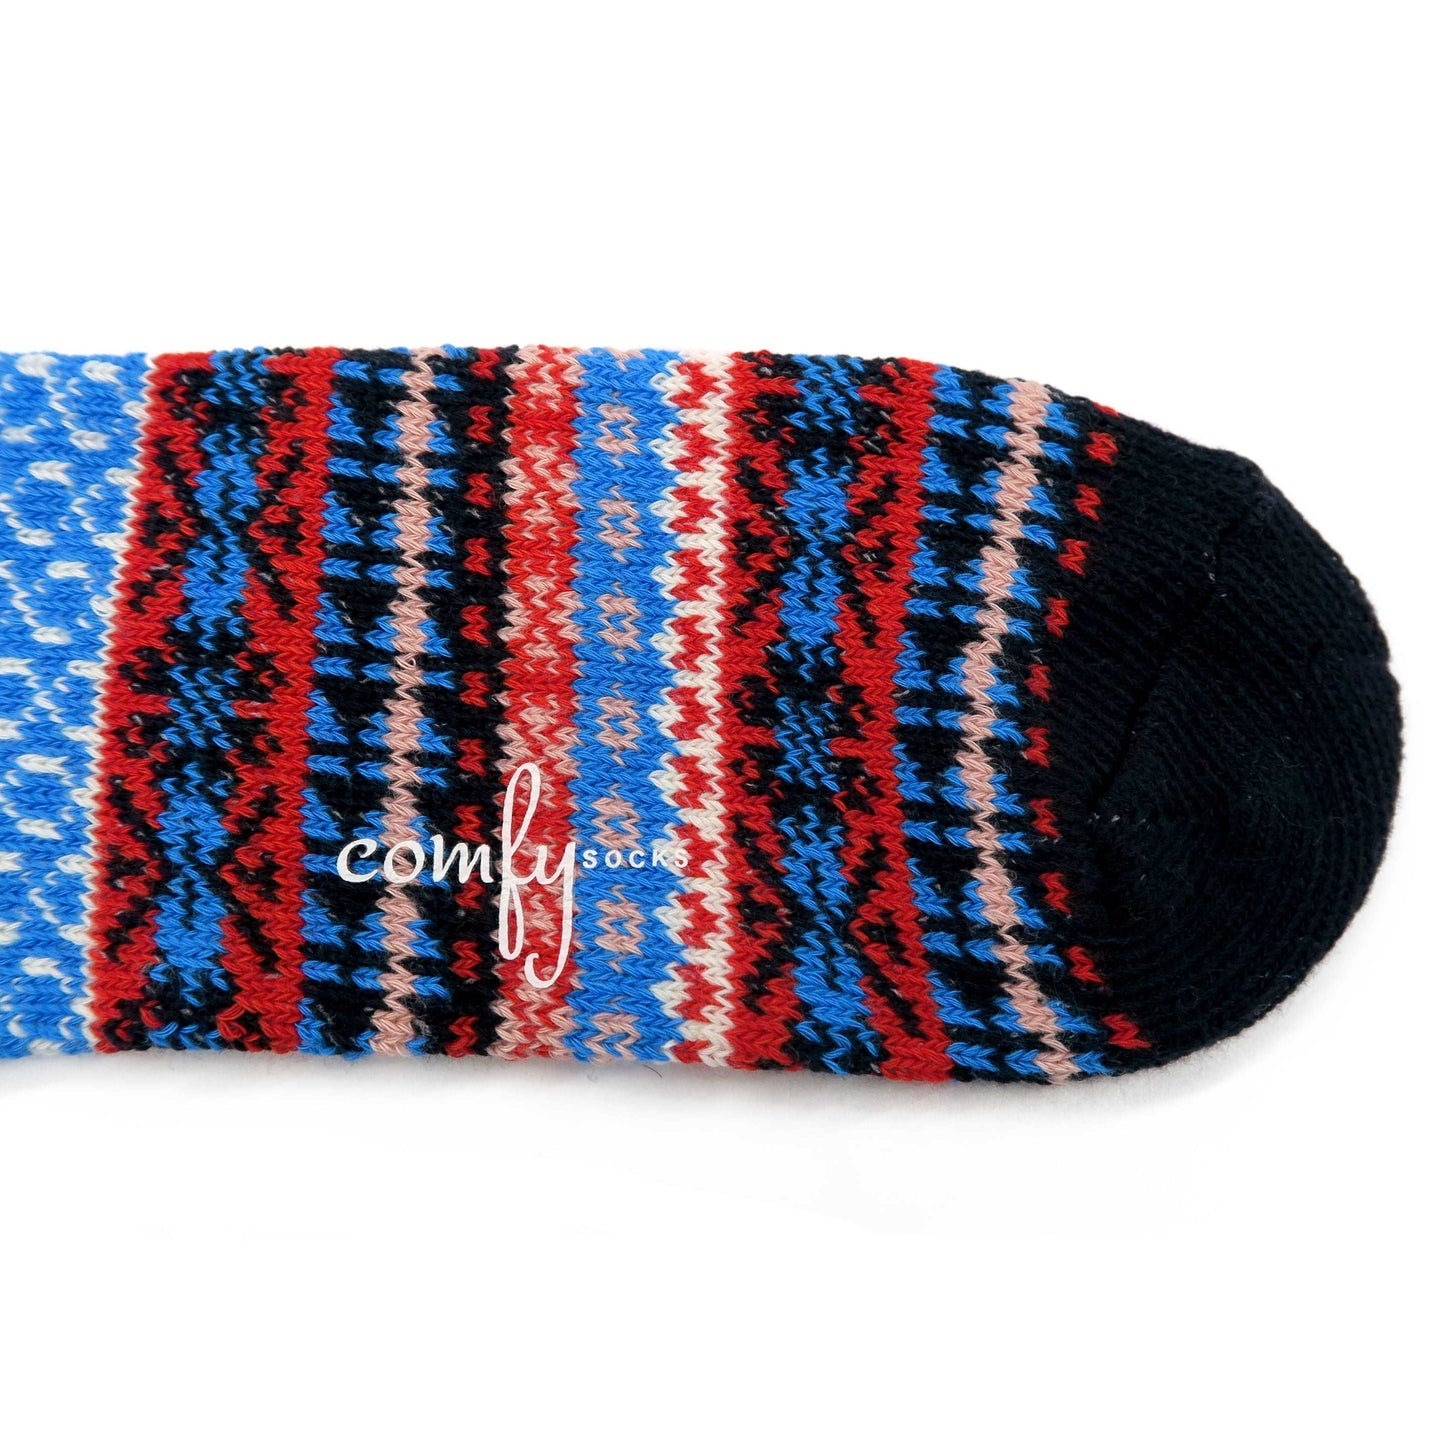 tribal pattern socks - white, blue and red color